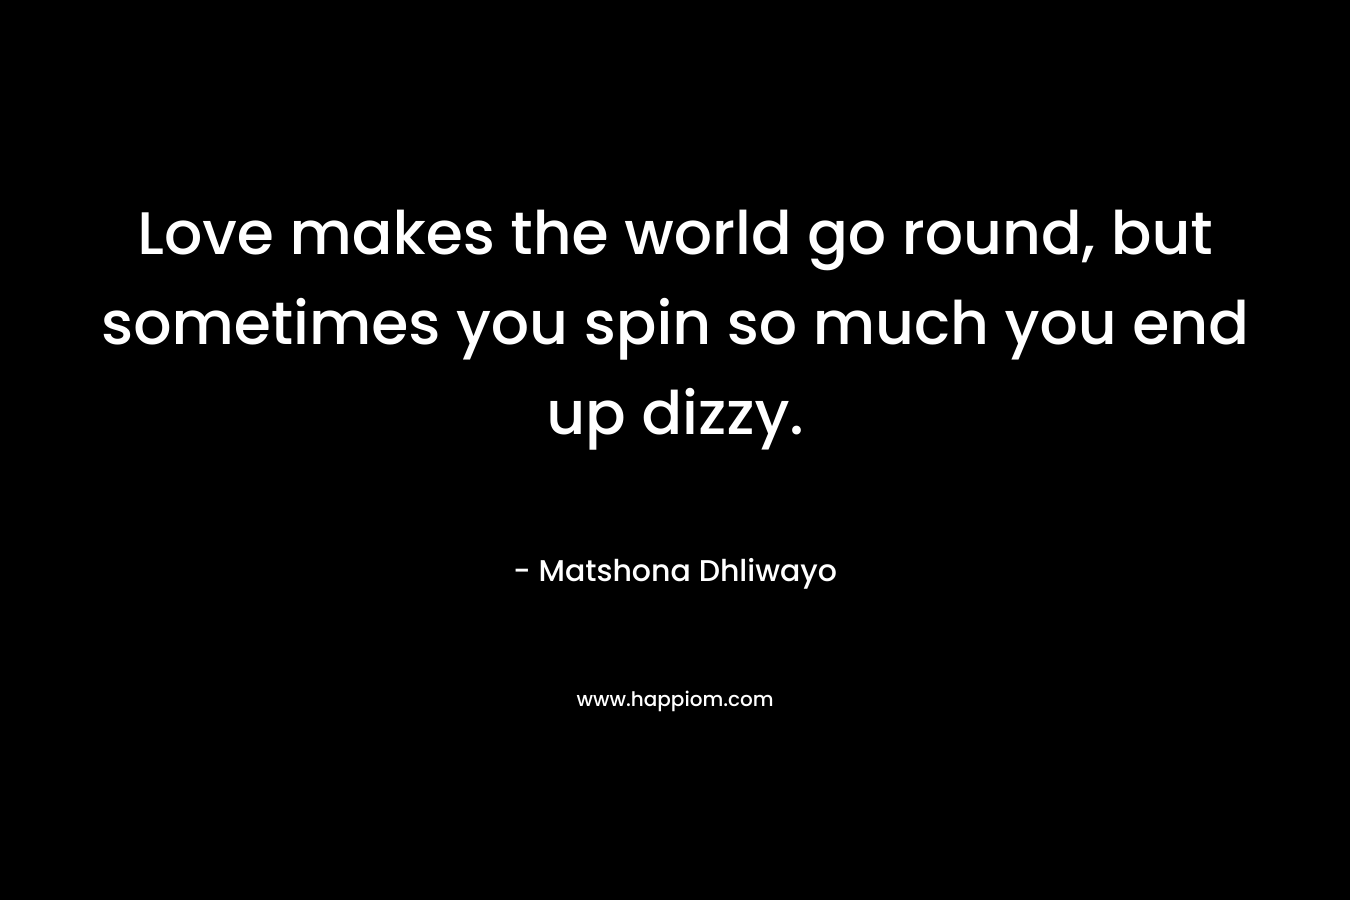 Love makes the world go round, but sometimes you spin so much you end up dizzy. – Matshona Dhliwayo